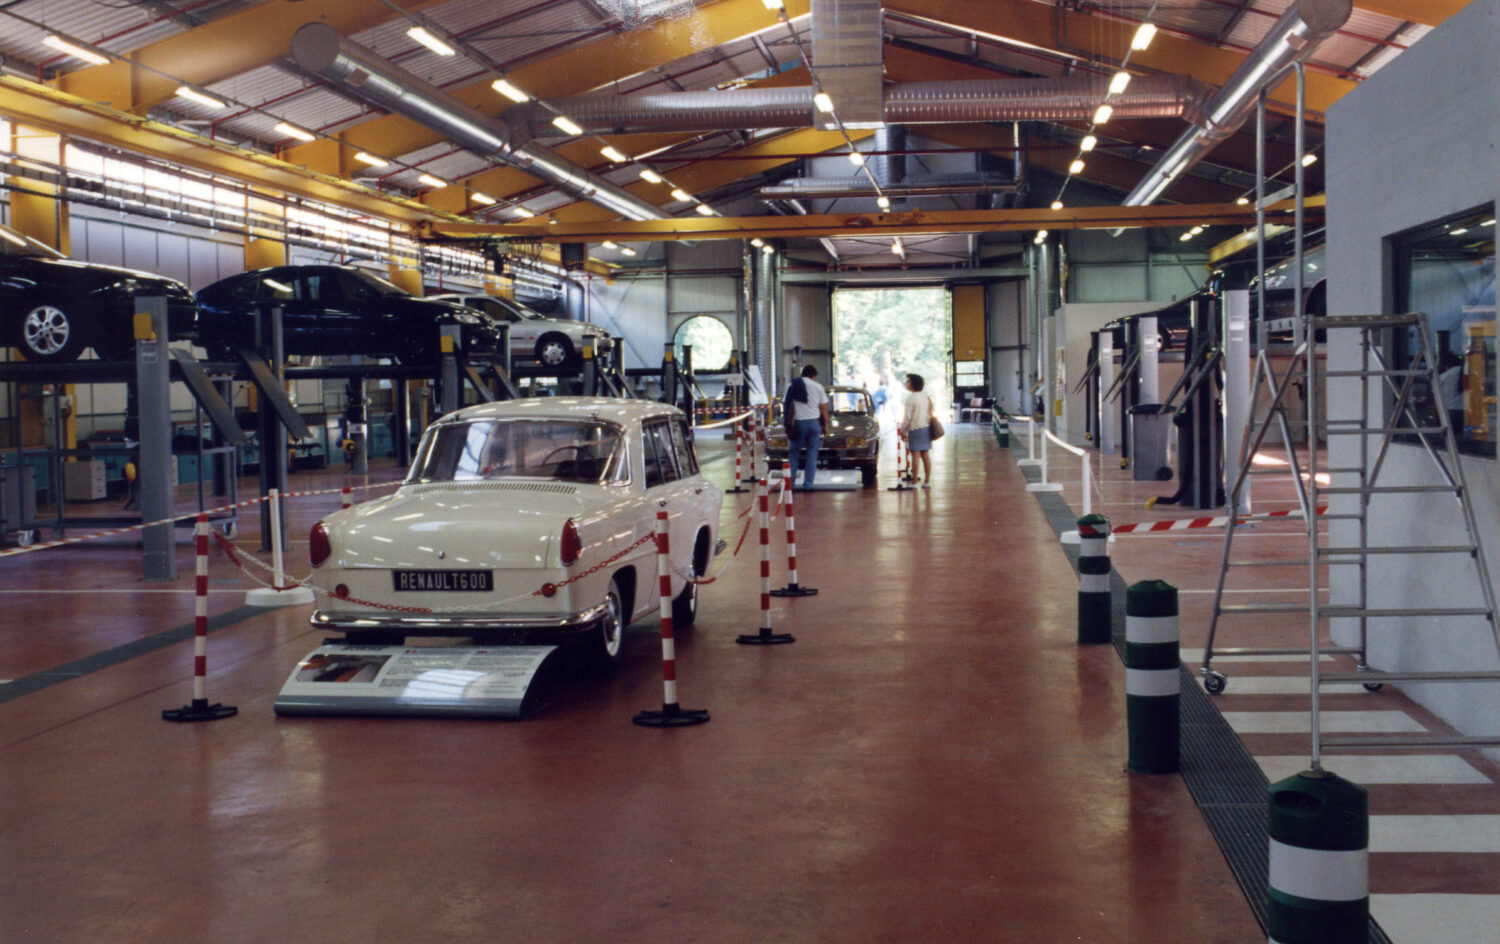 2022 - Story Renault Group - Aubevoye Technical Centre: 40 years of passion for cars and stories to tell